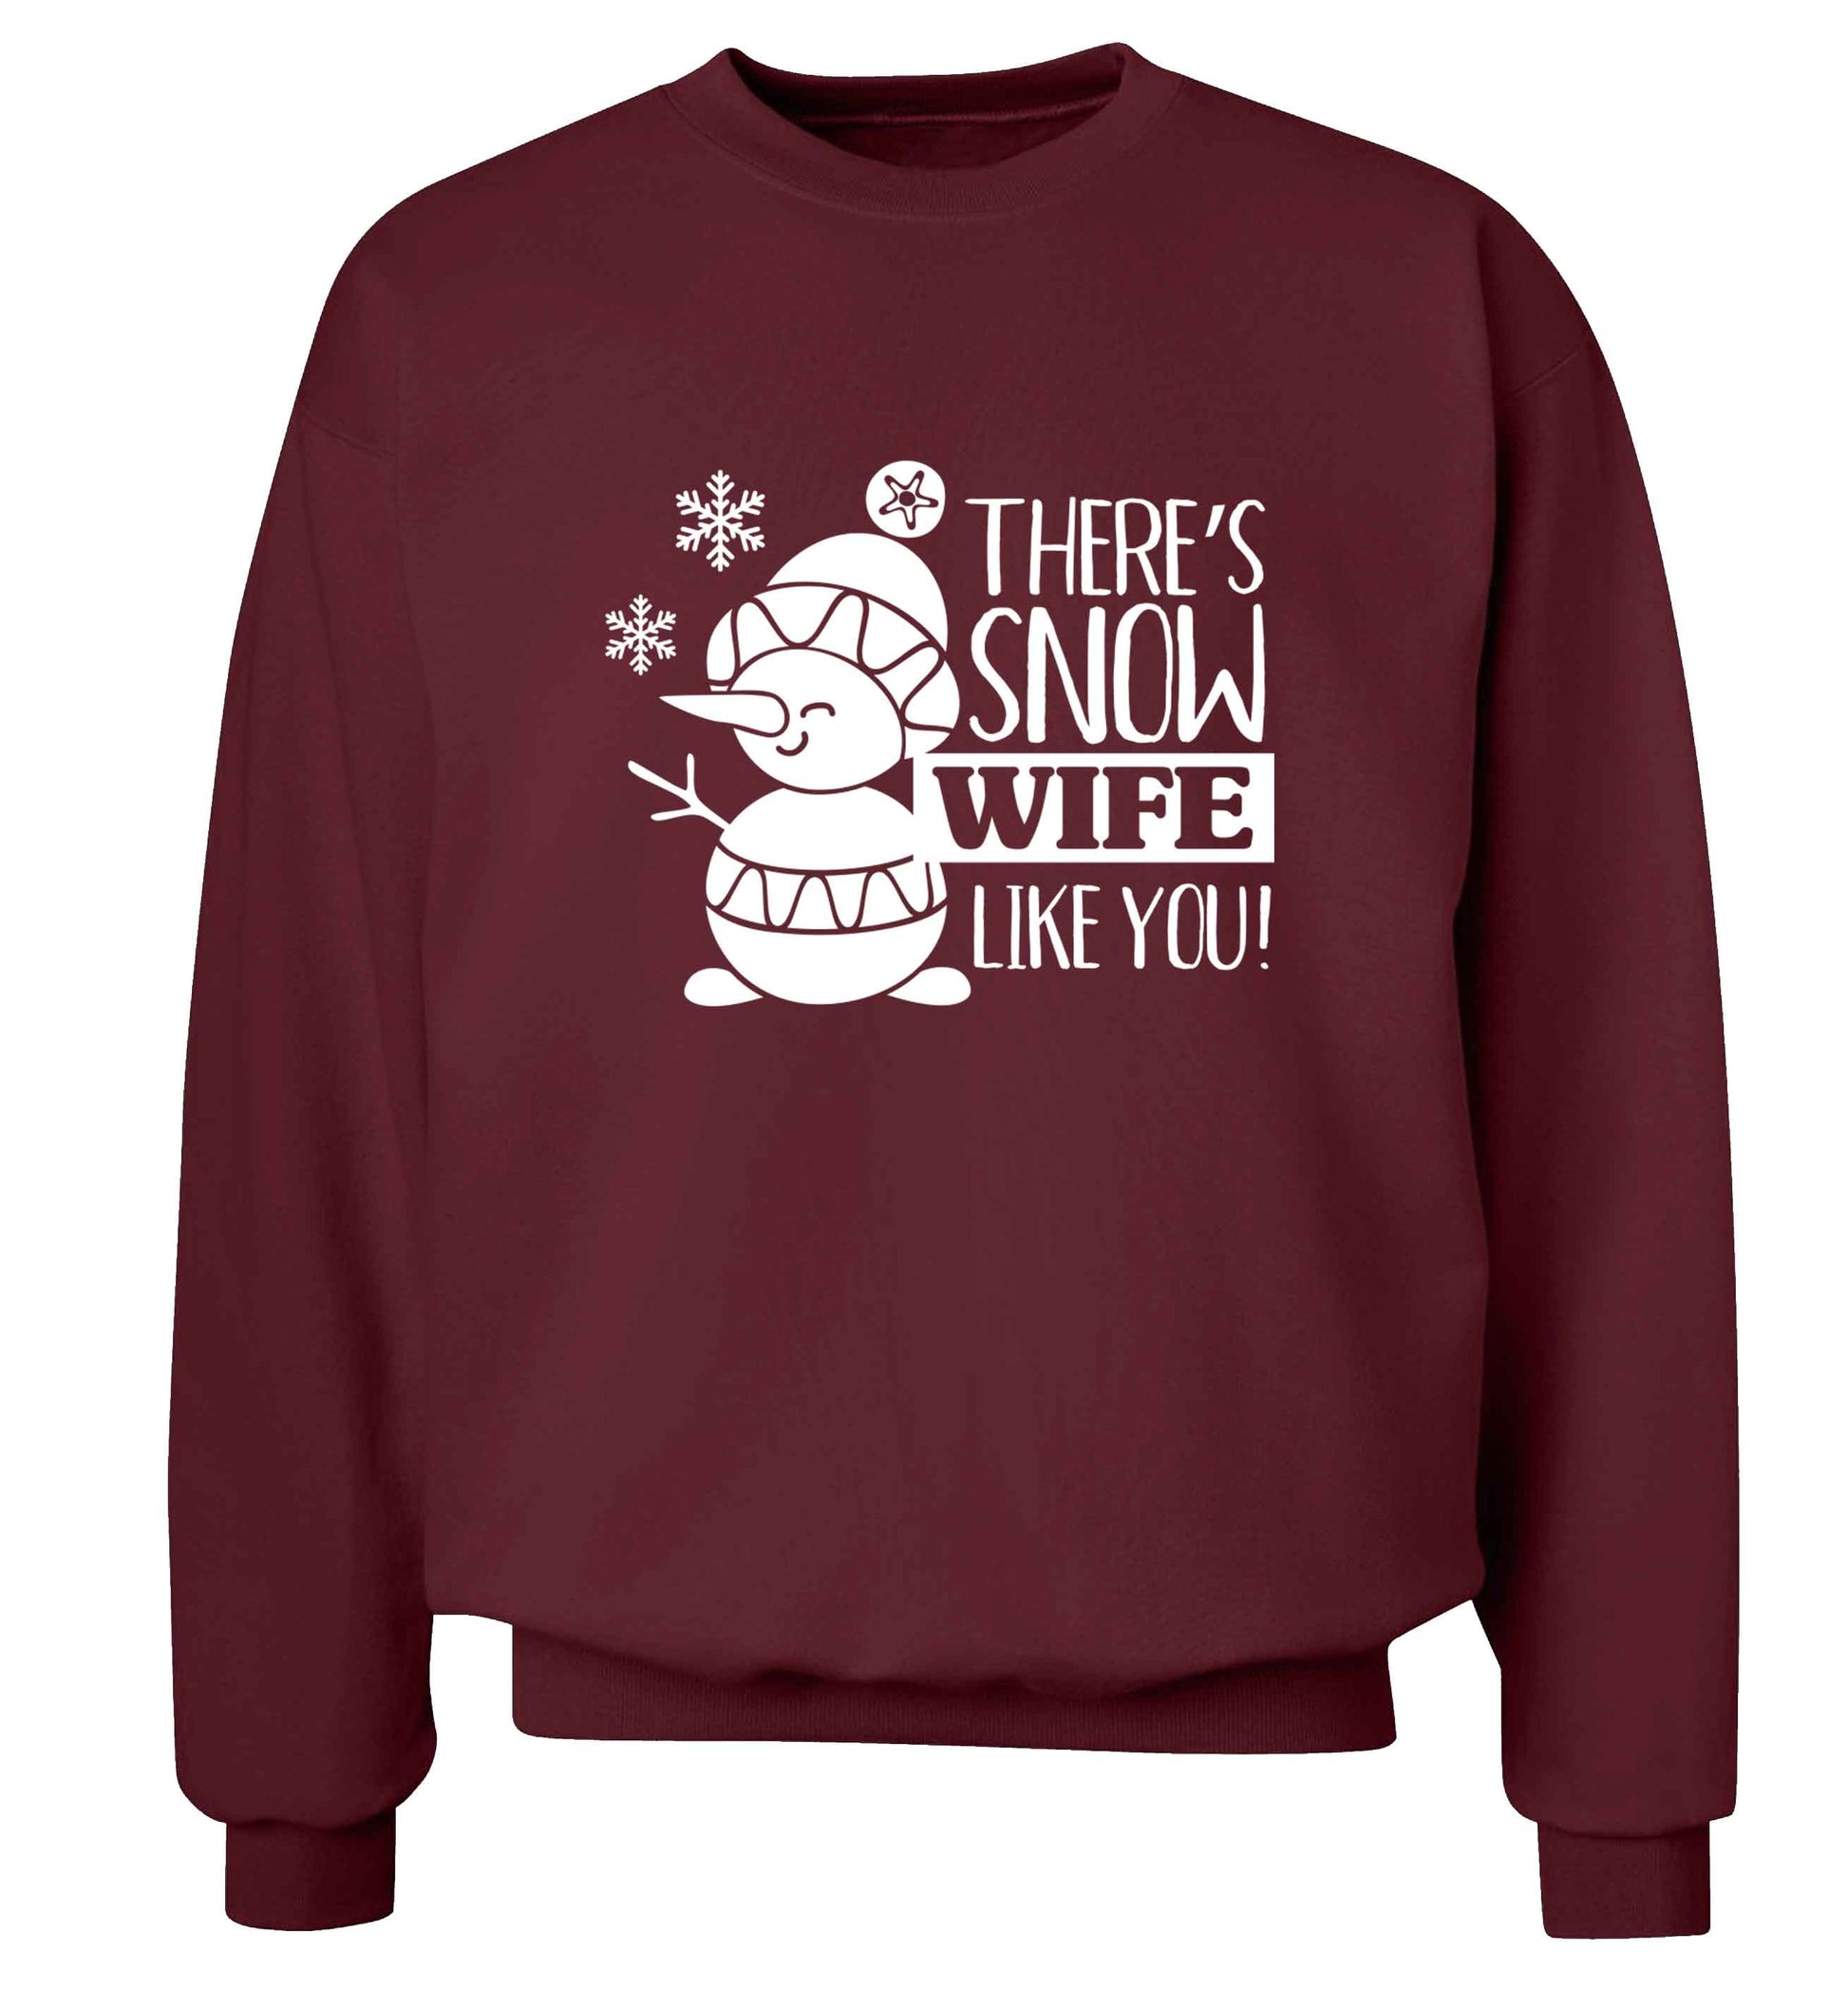 There's snow wife like you adult's unisex maroon sweater 2XL